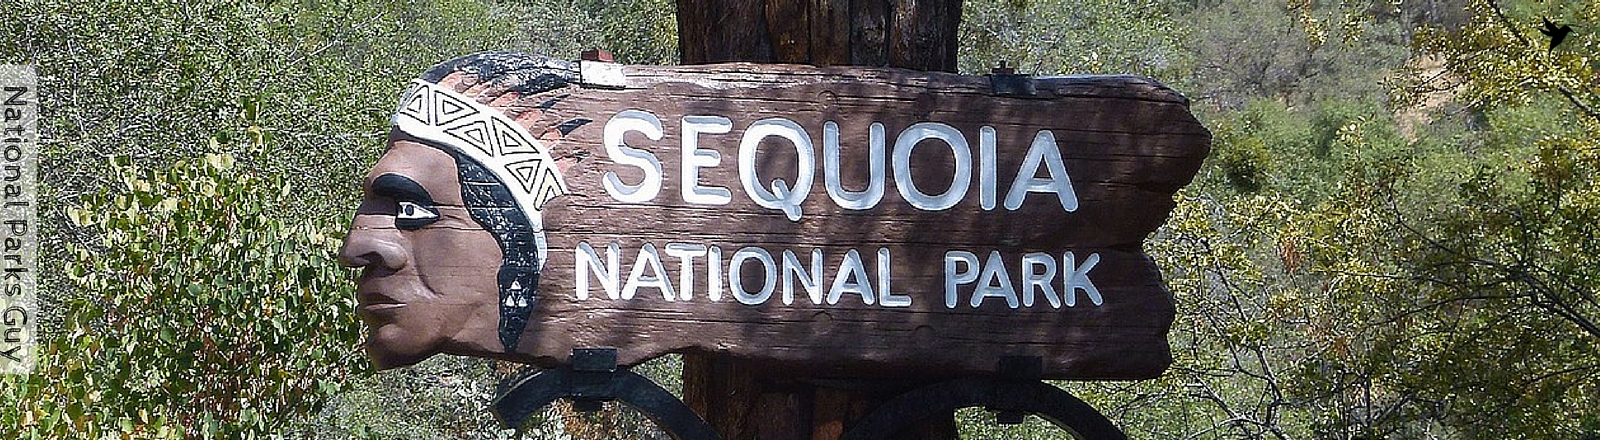 Sequoia National Park, USA, National Parks Guy, Stories, Tales, Adventures, Wildlife